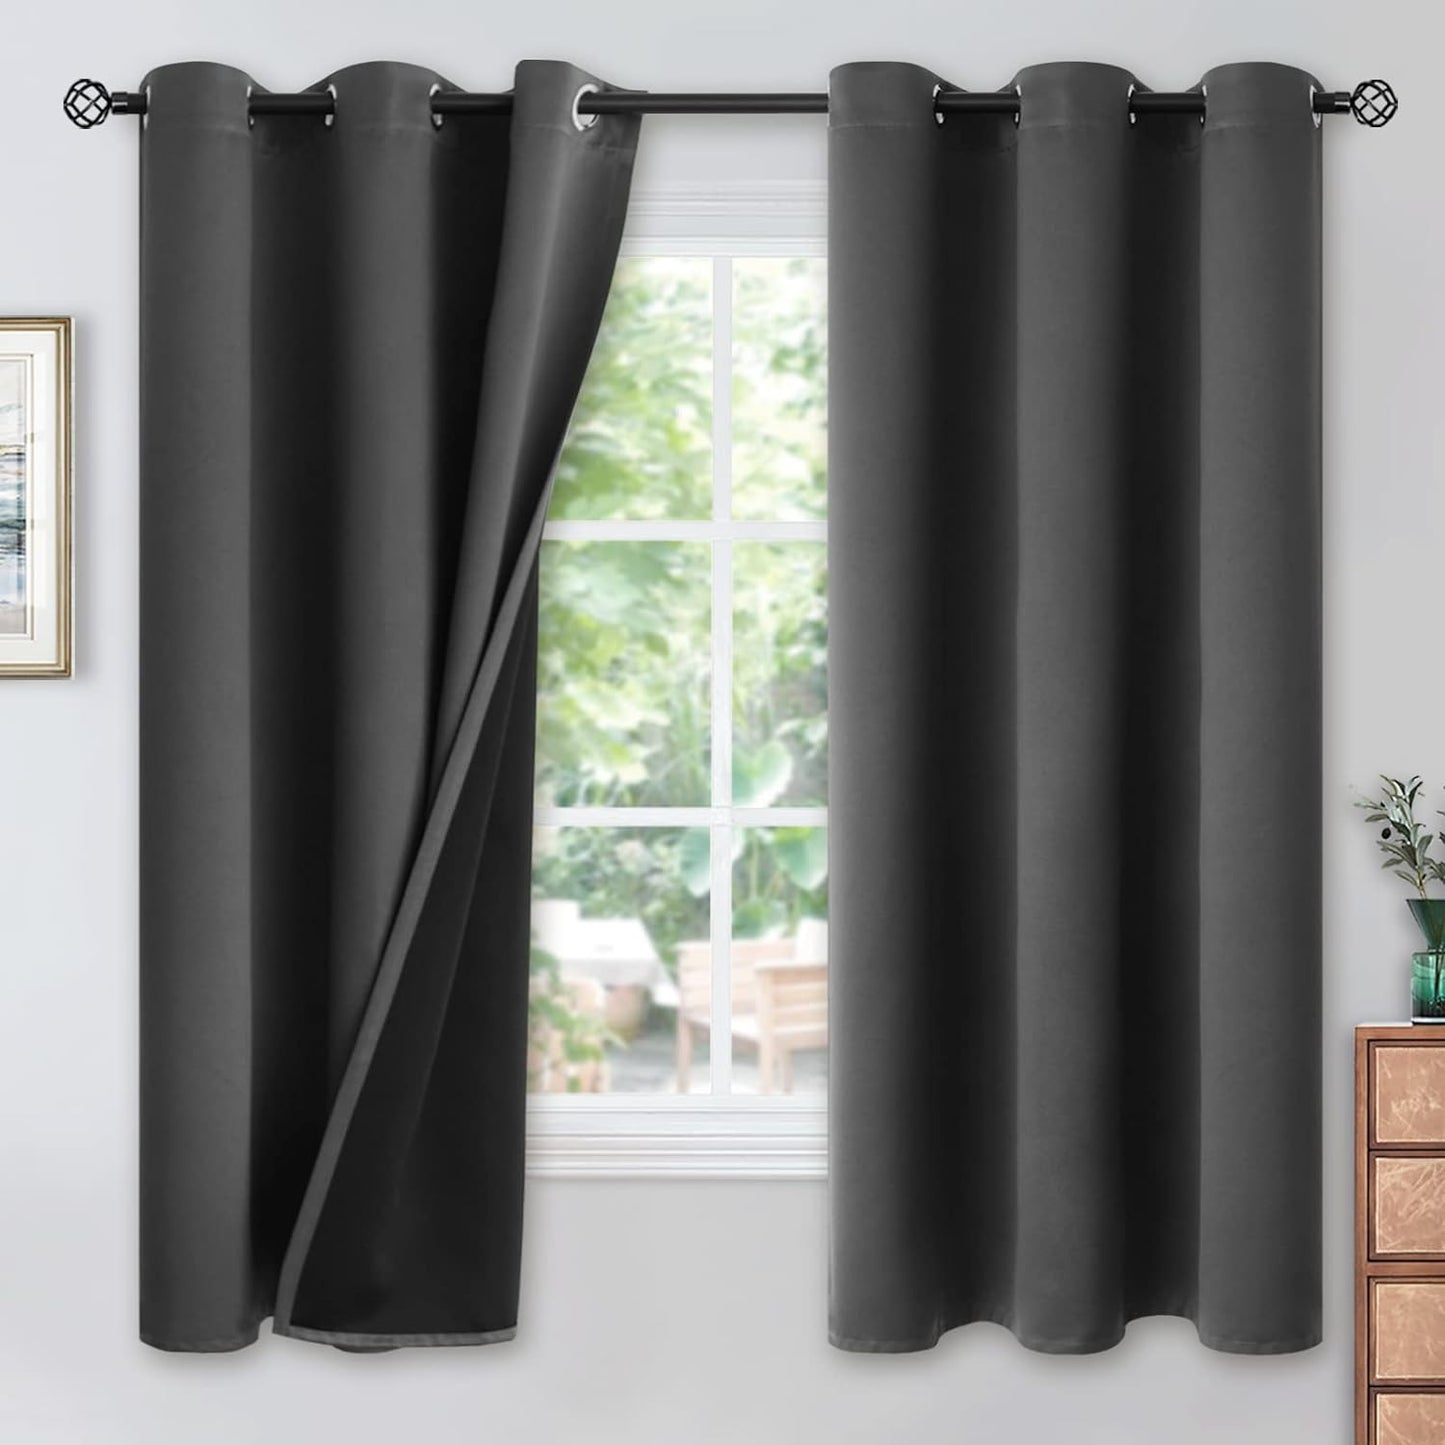 Youngstex Black 100% Blackout Curtains 63 Inches for Bedroom Thermal Insulated Total Room Darkening Curtains for Living Room Window with Black Back Grommet, 2 Panels, 42 X 63 Inch  YoungsTex Dark Grey 42W X 63L 